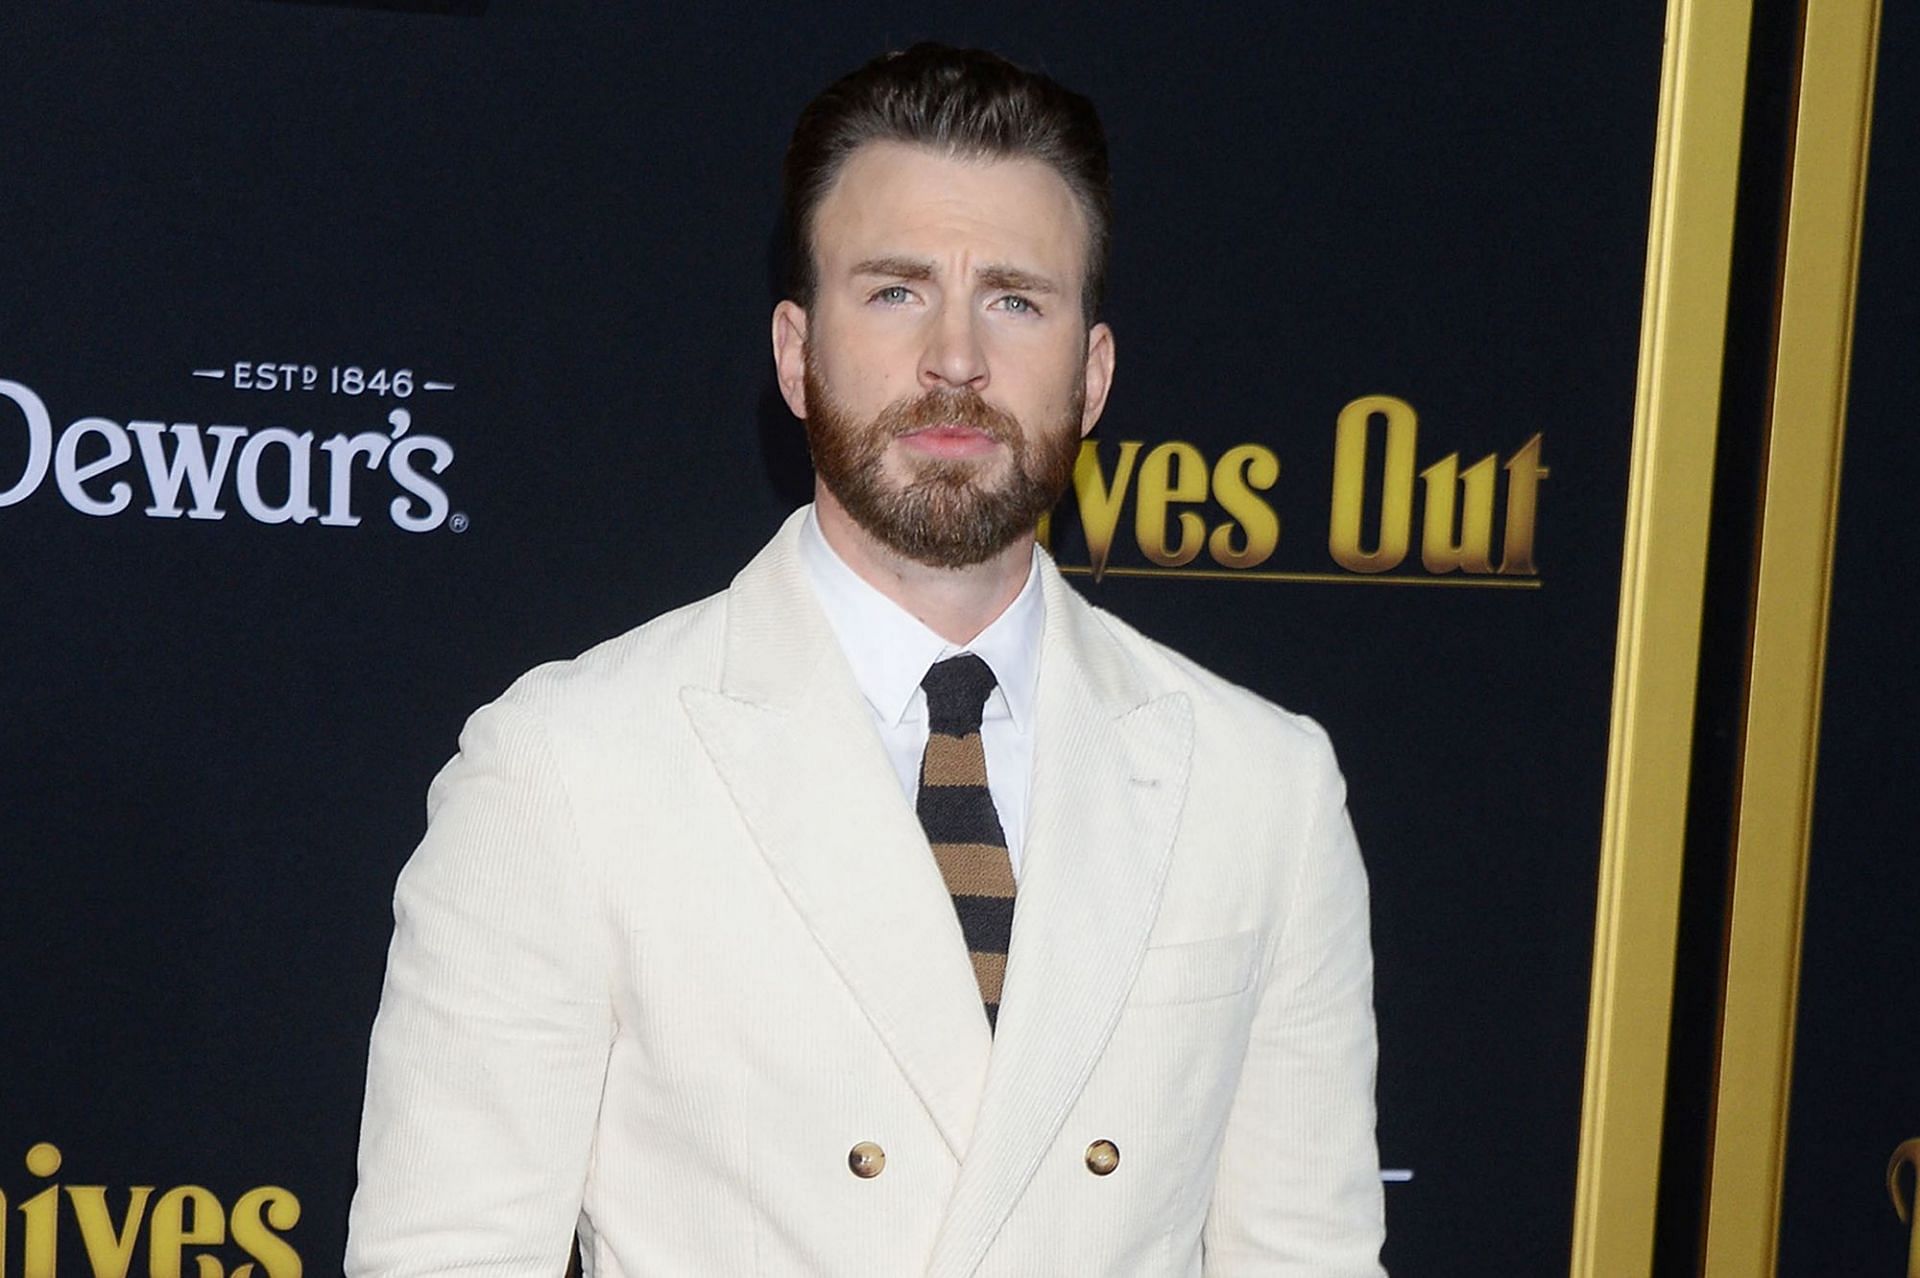 Chris Evans earns $15 million for his role as the leader of the Avengers (Image via Getty Images)